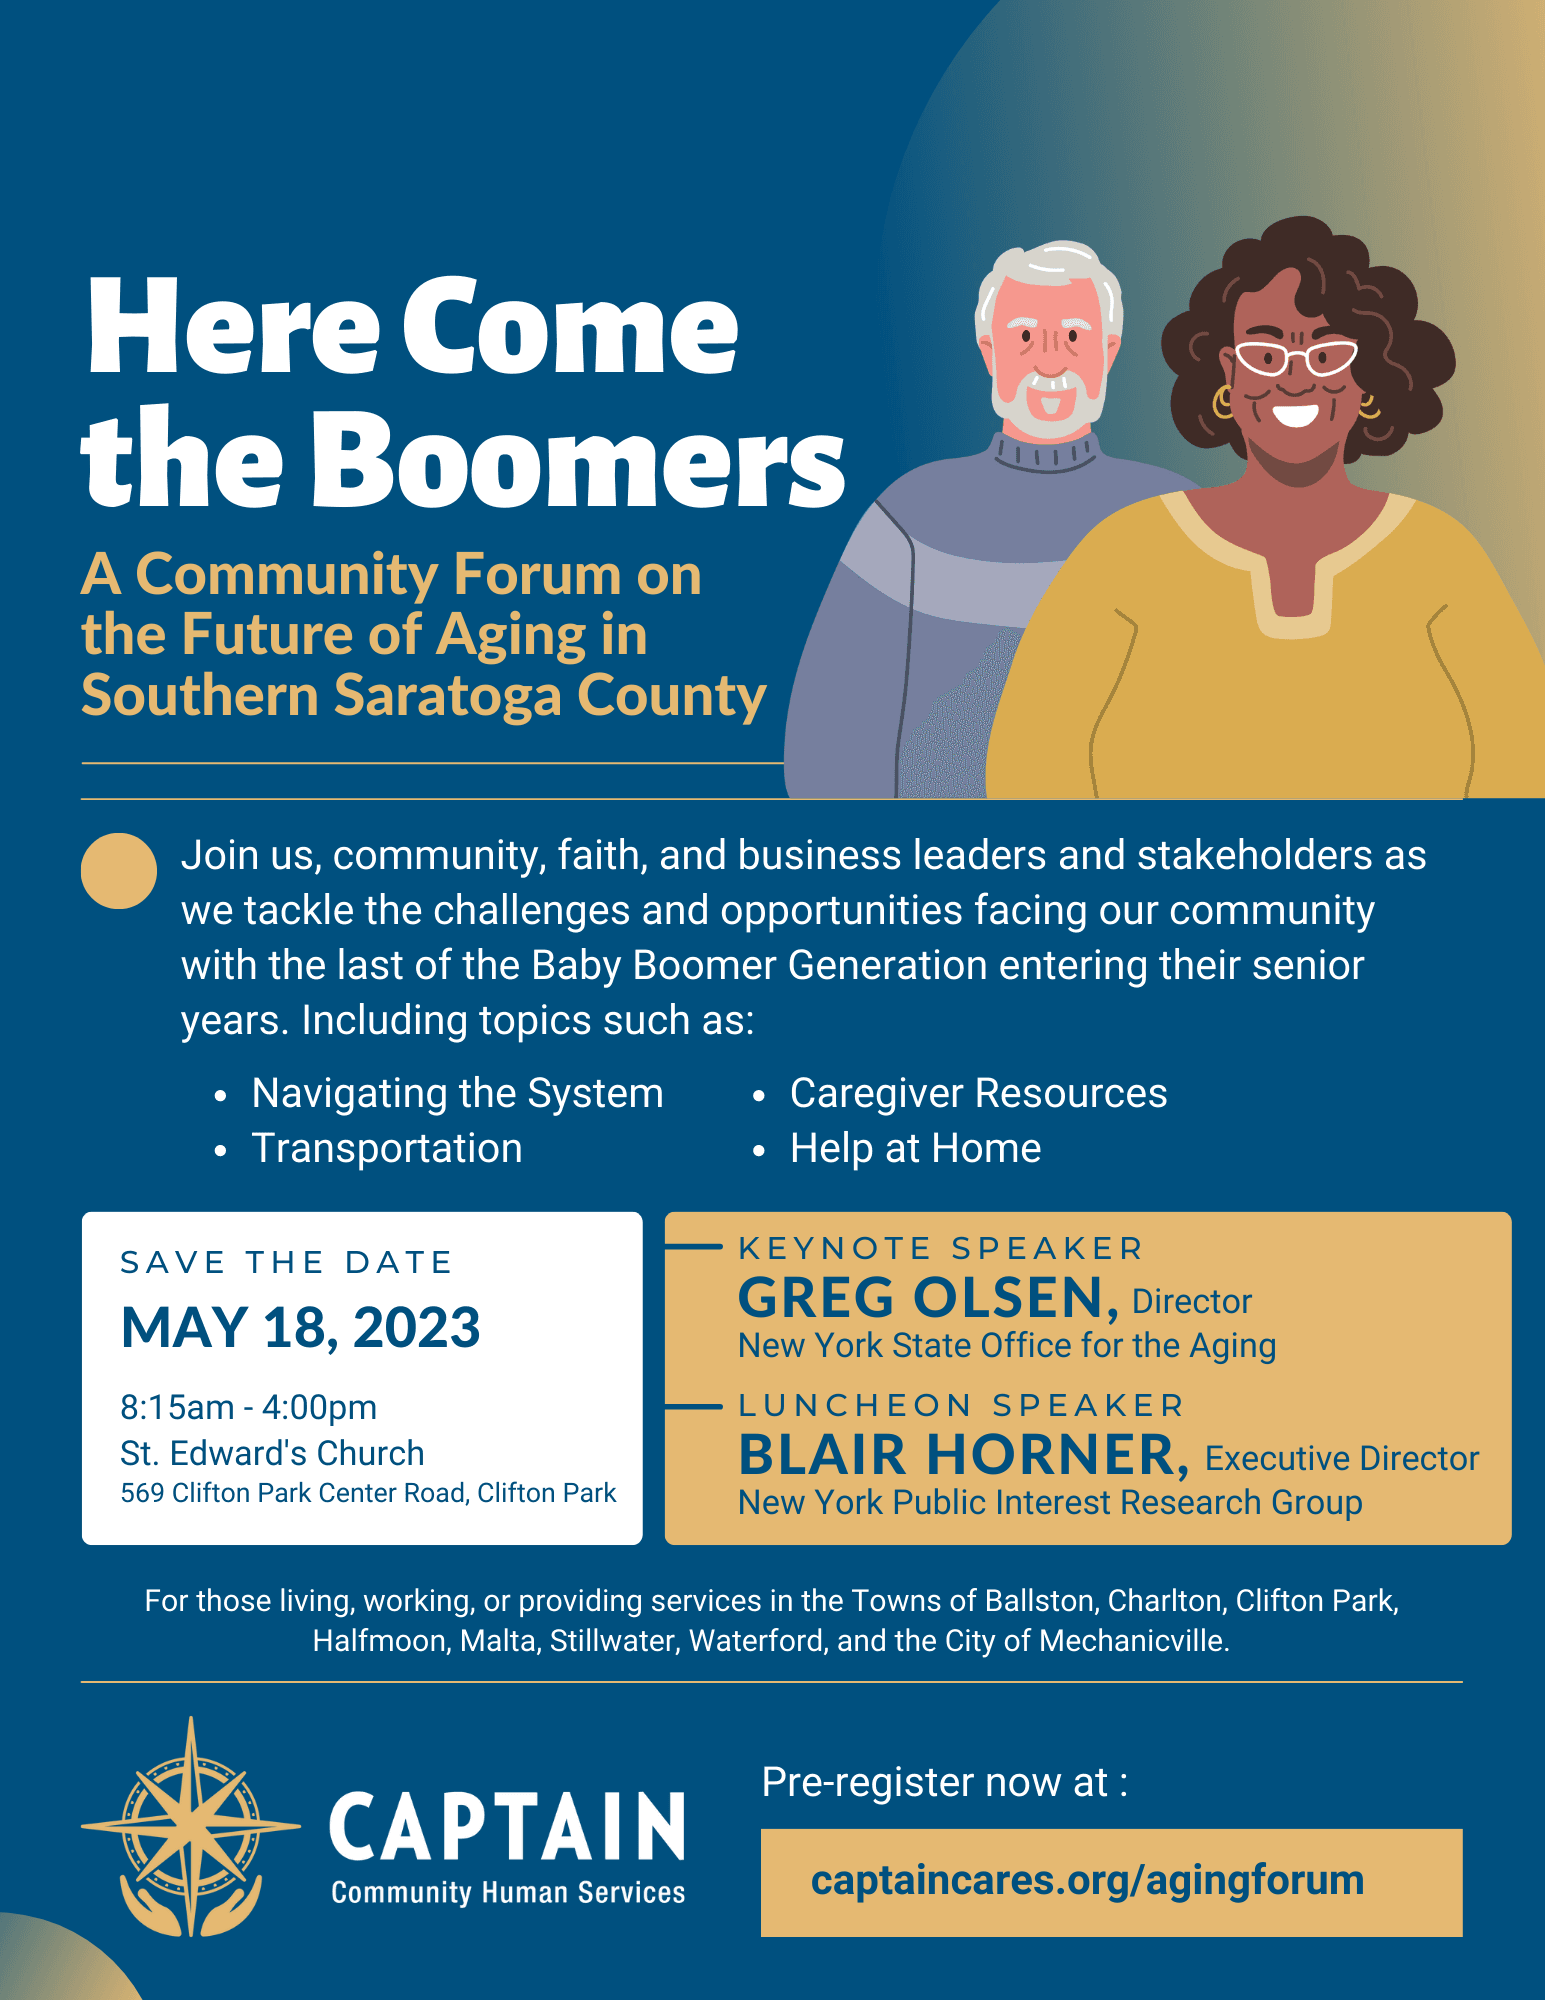 Save the Date: Here Come the Boomers - A Community Forum on the Future of Aging in Southern Saratoga County